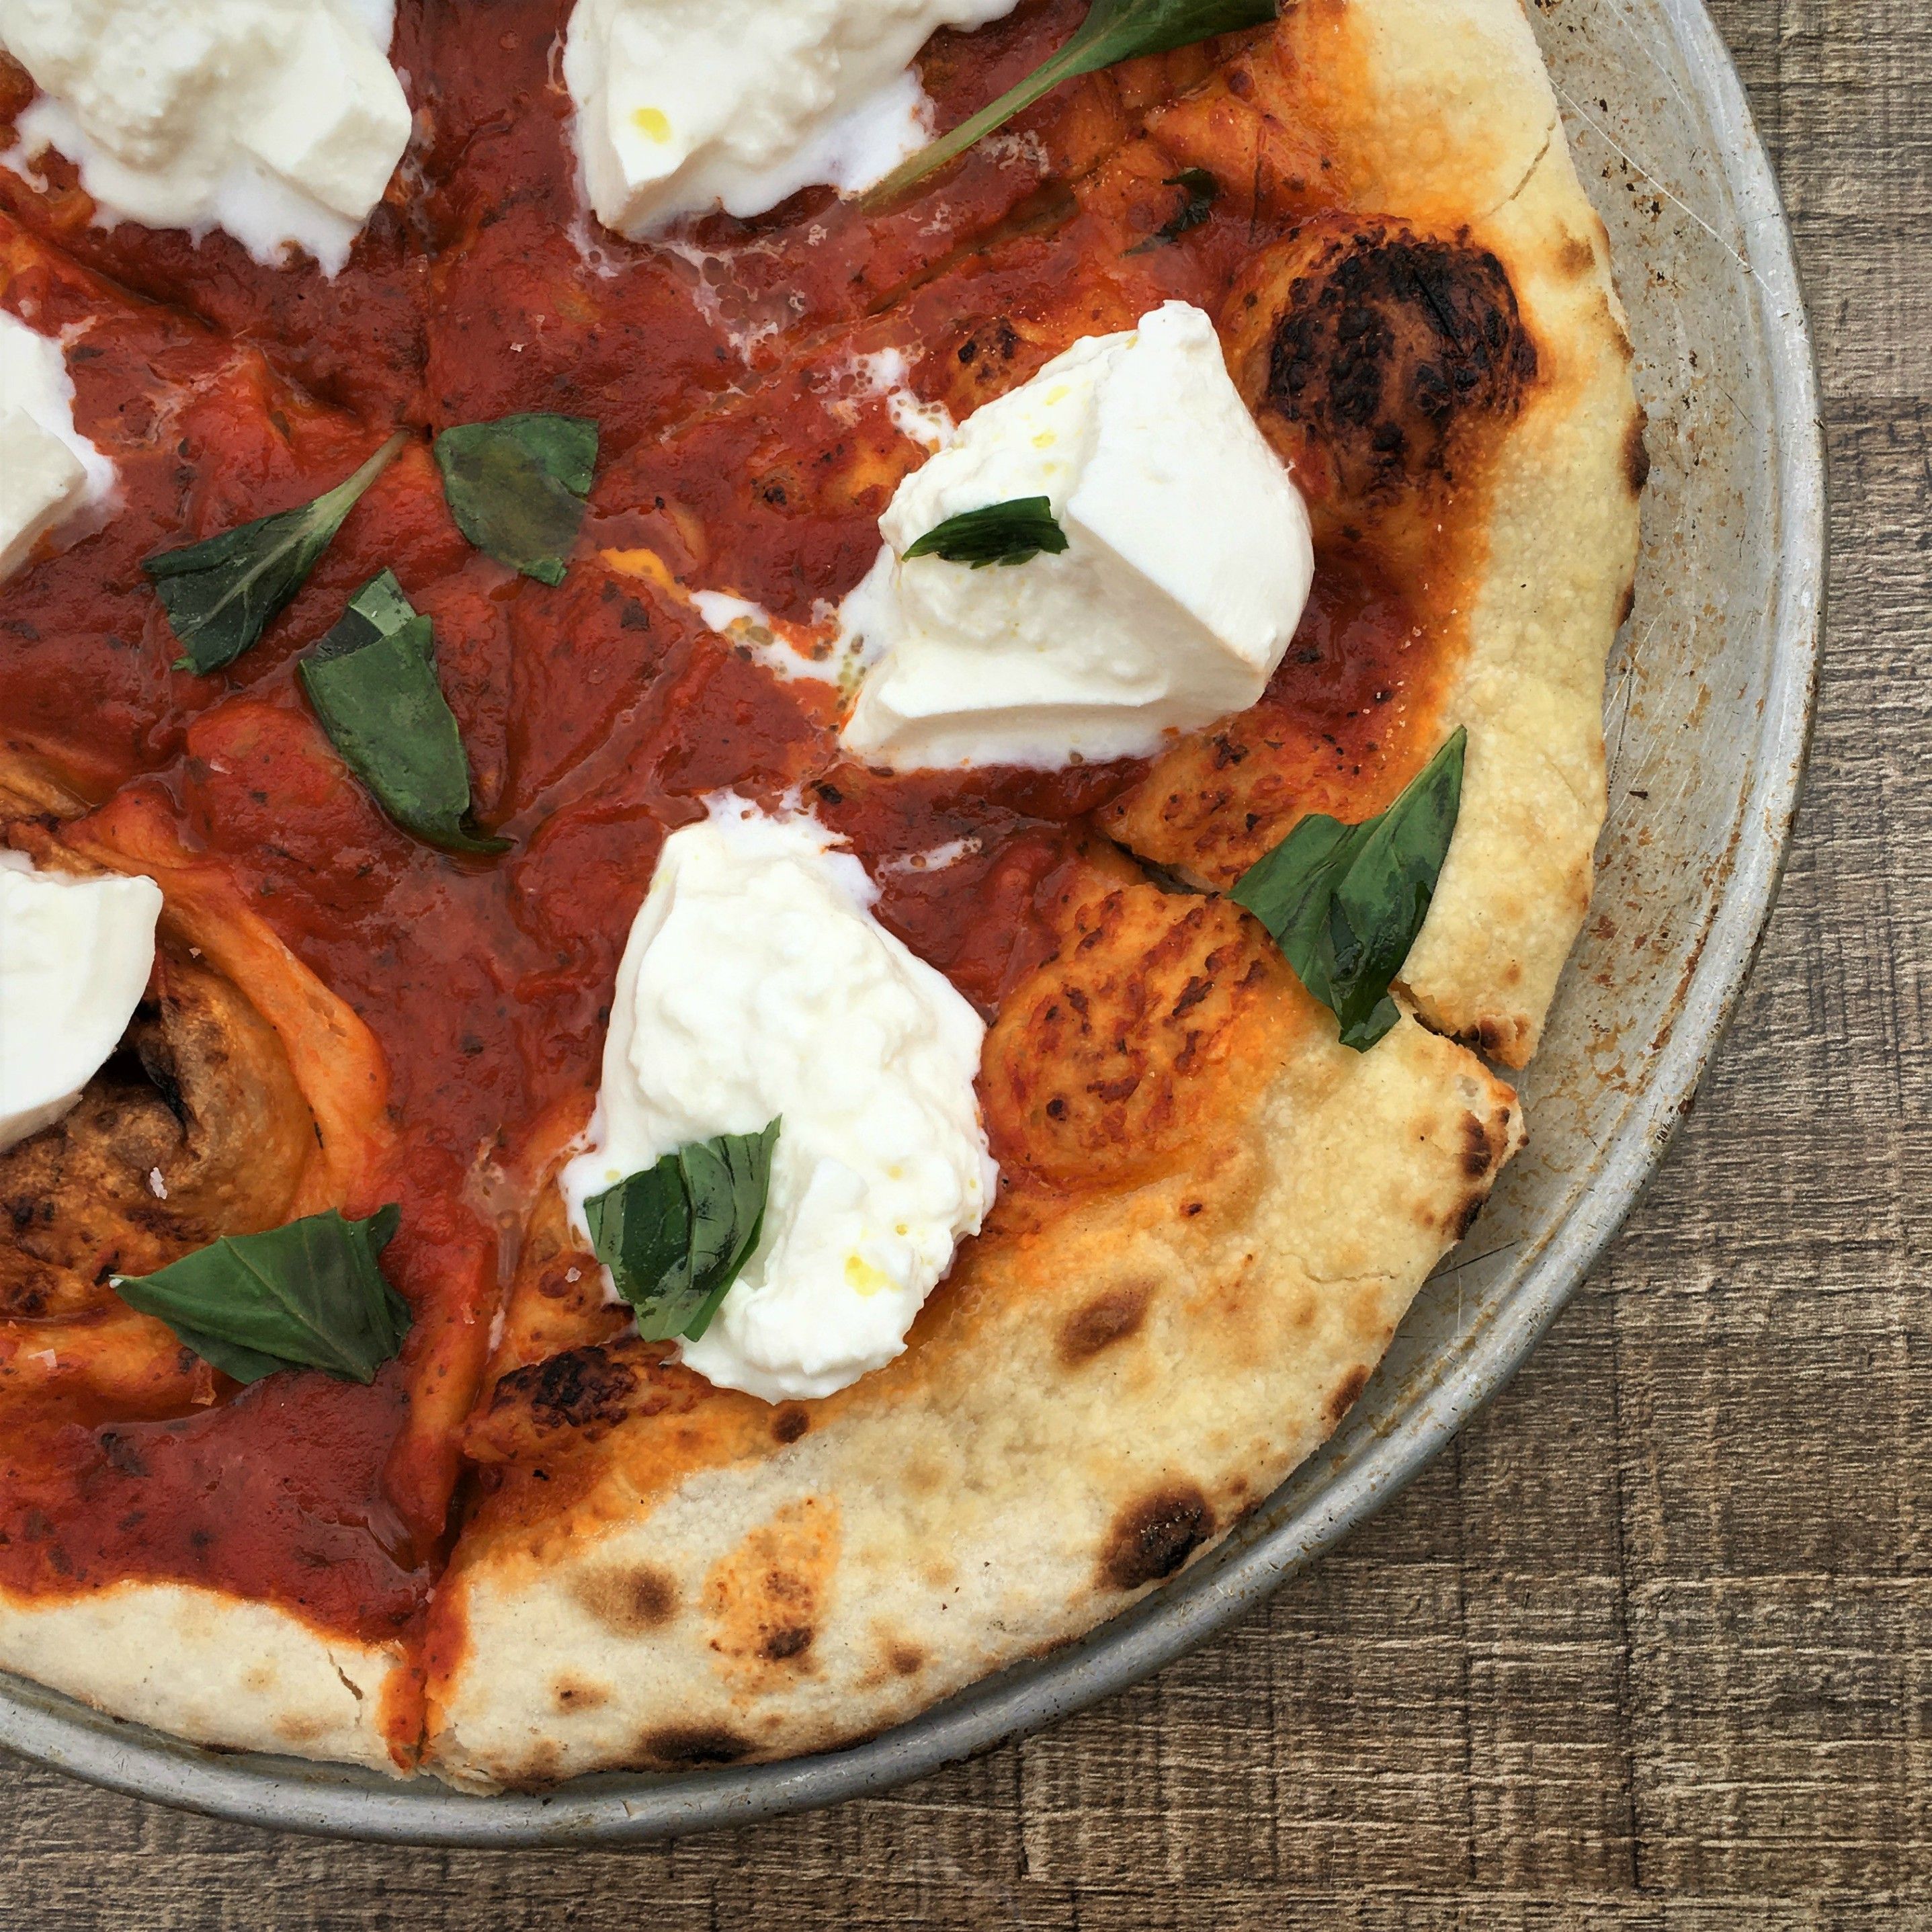 Pizza topped with tomato sauce, gobs of burrata, and fresh basil leaves